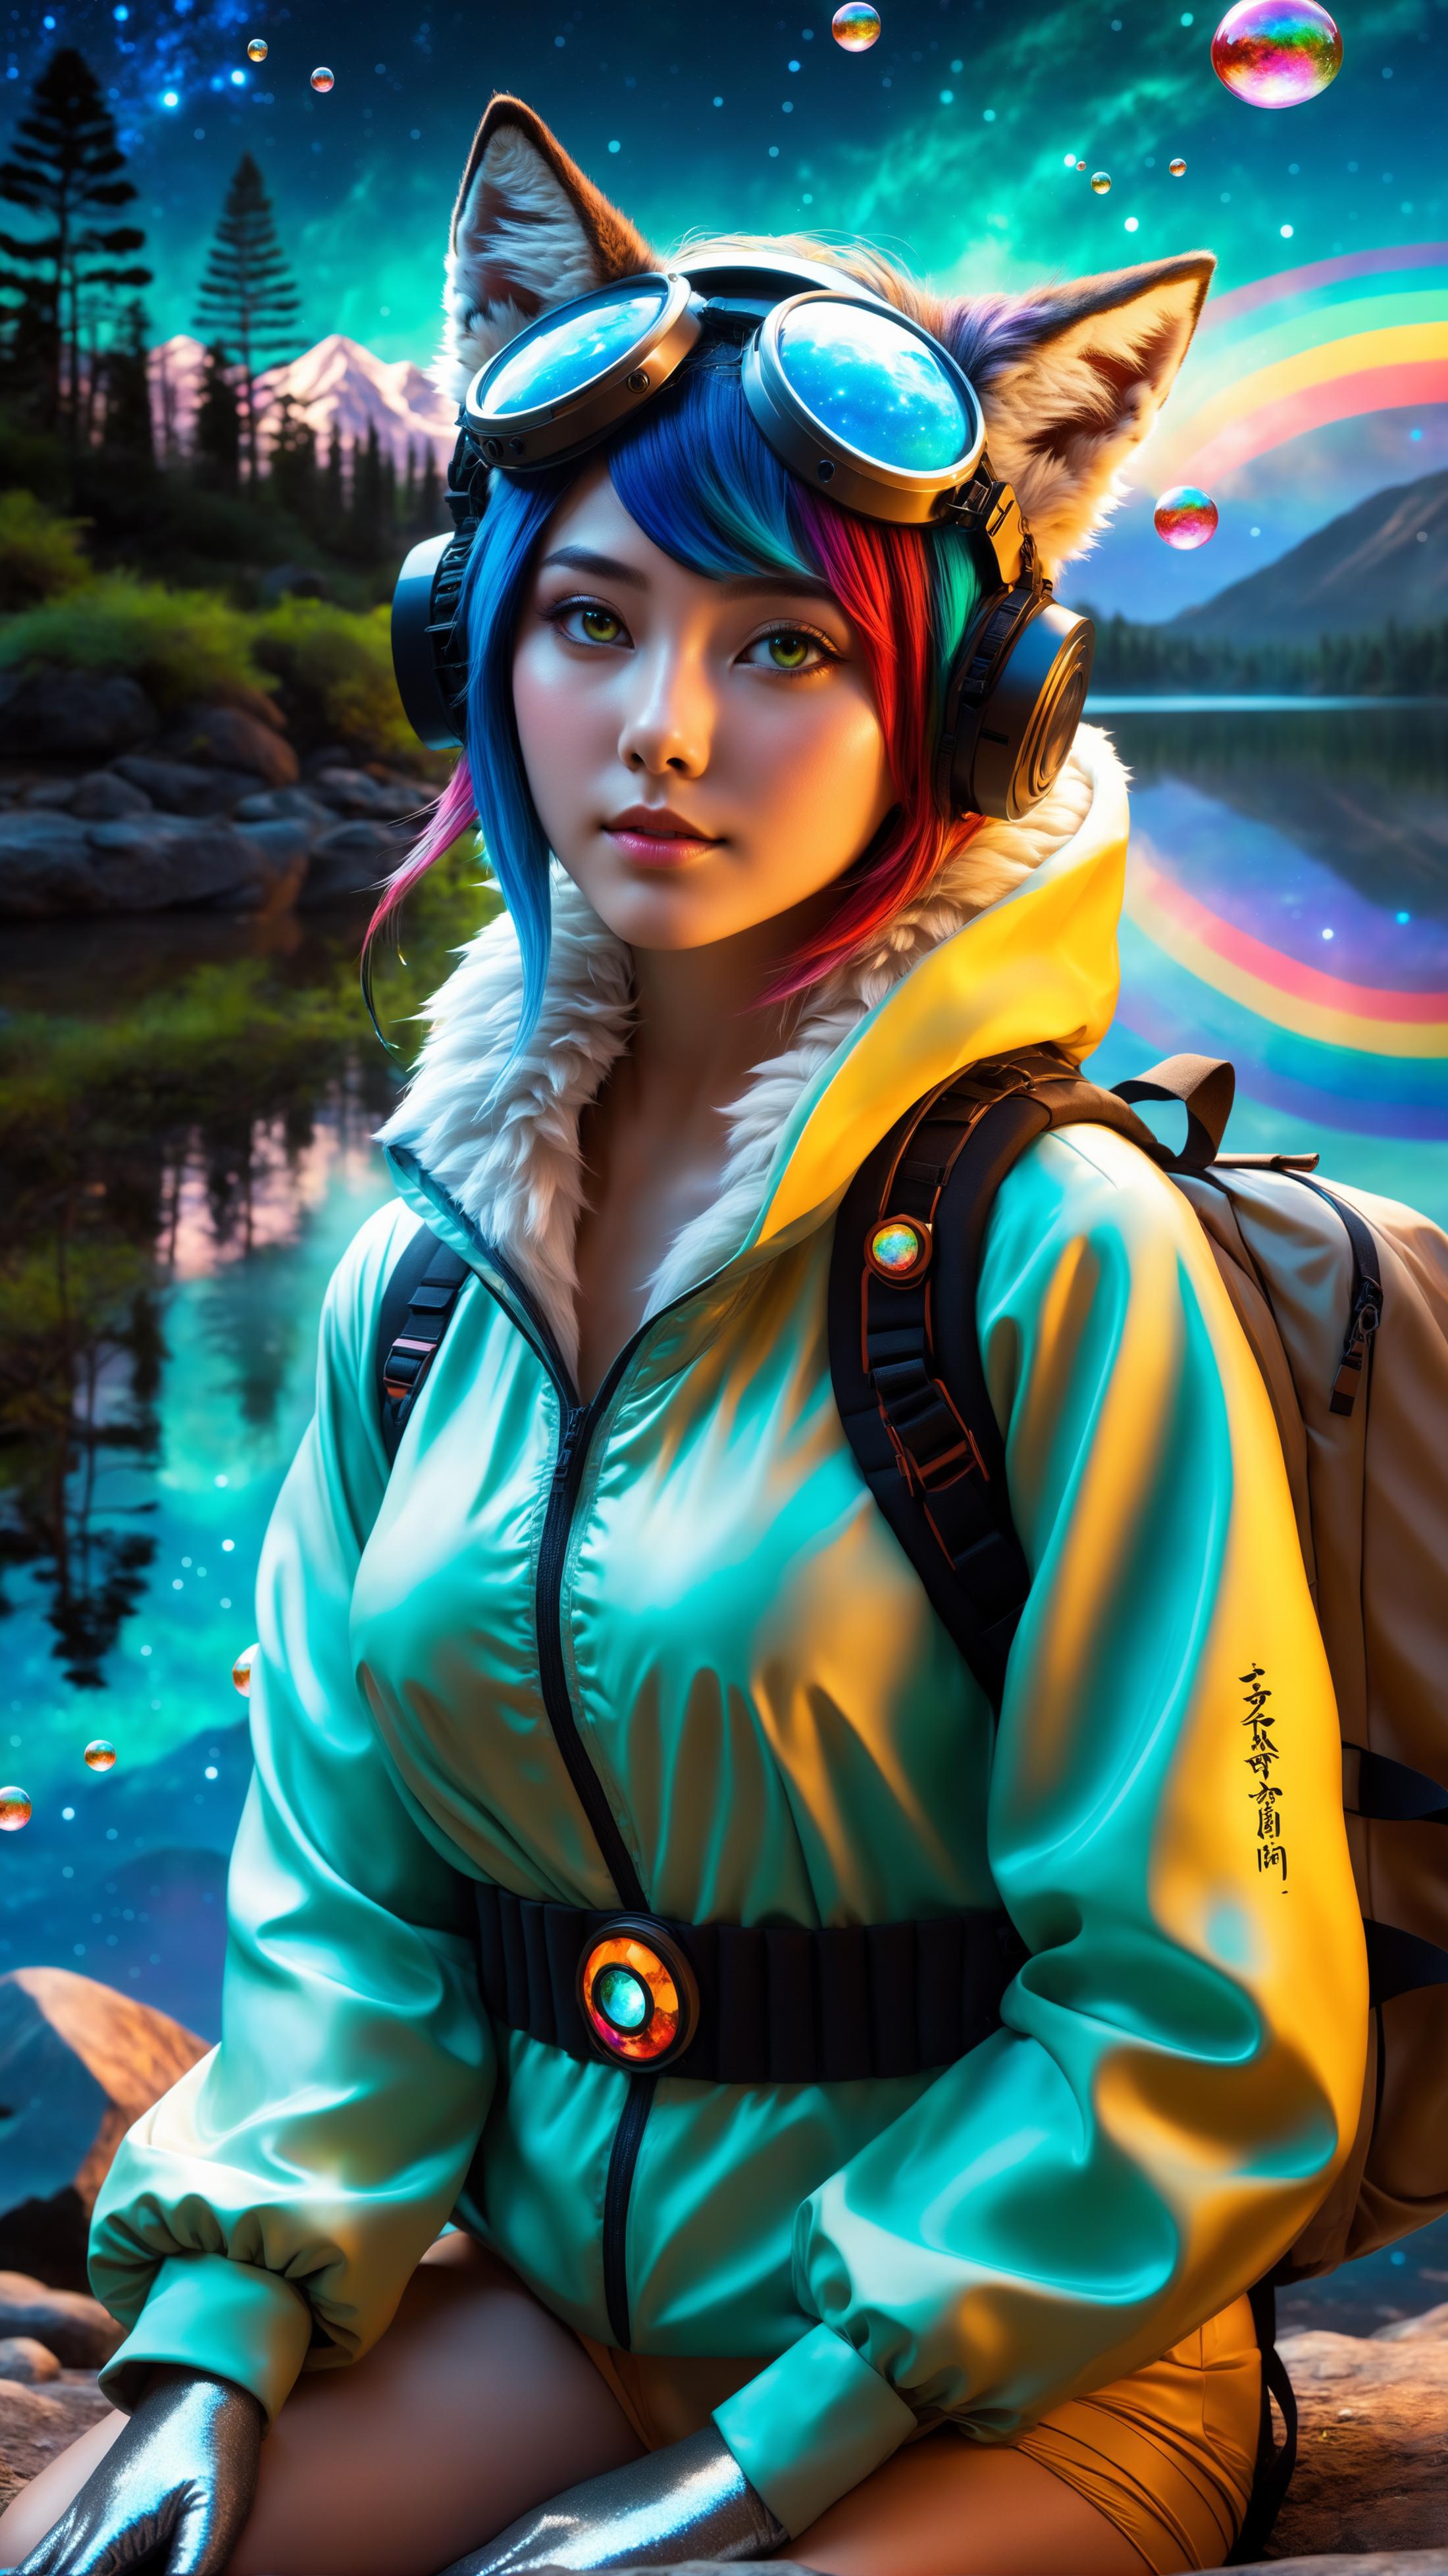 A colorful cartoon woman with a backpack and headphones on.